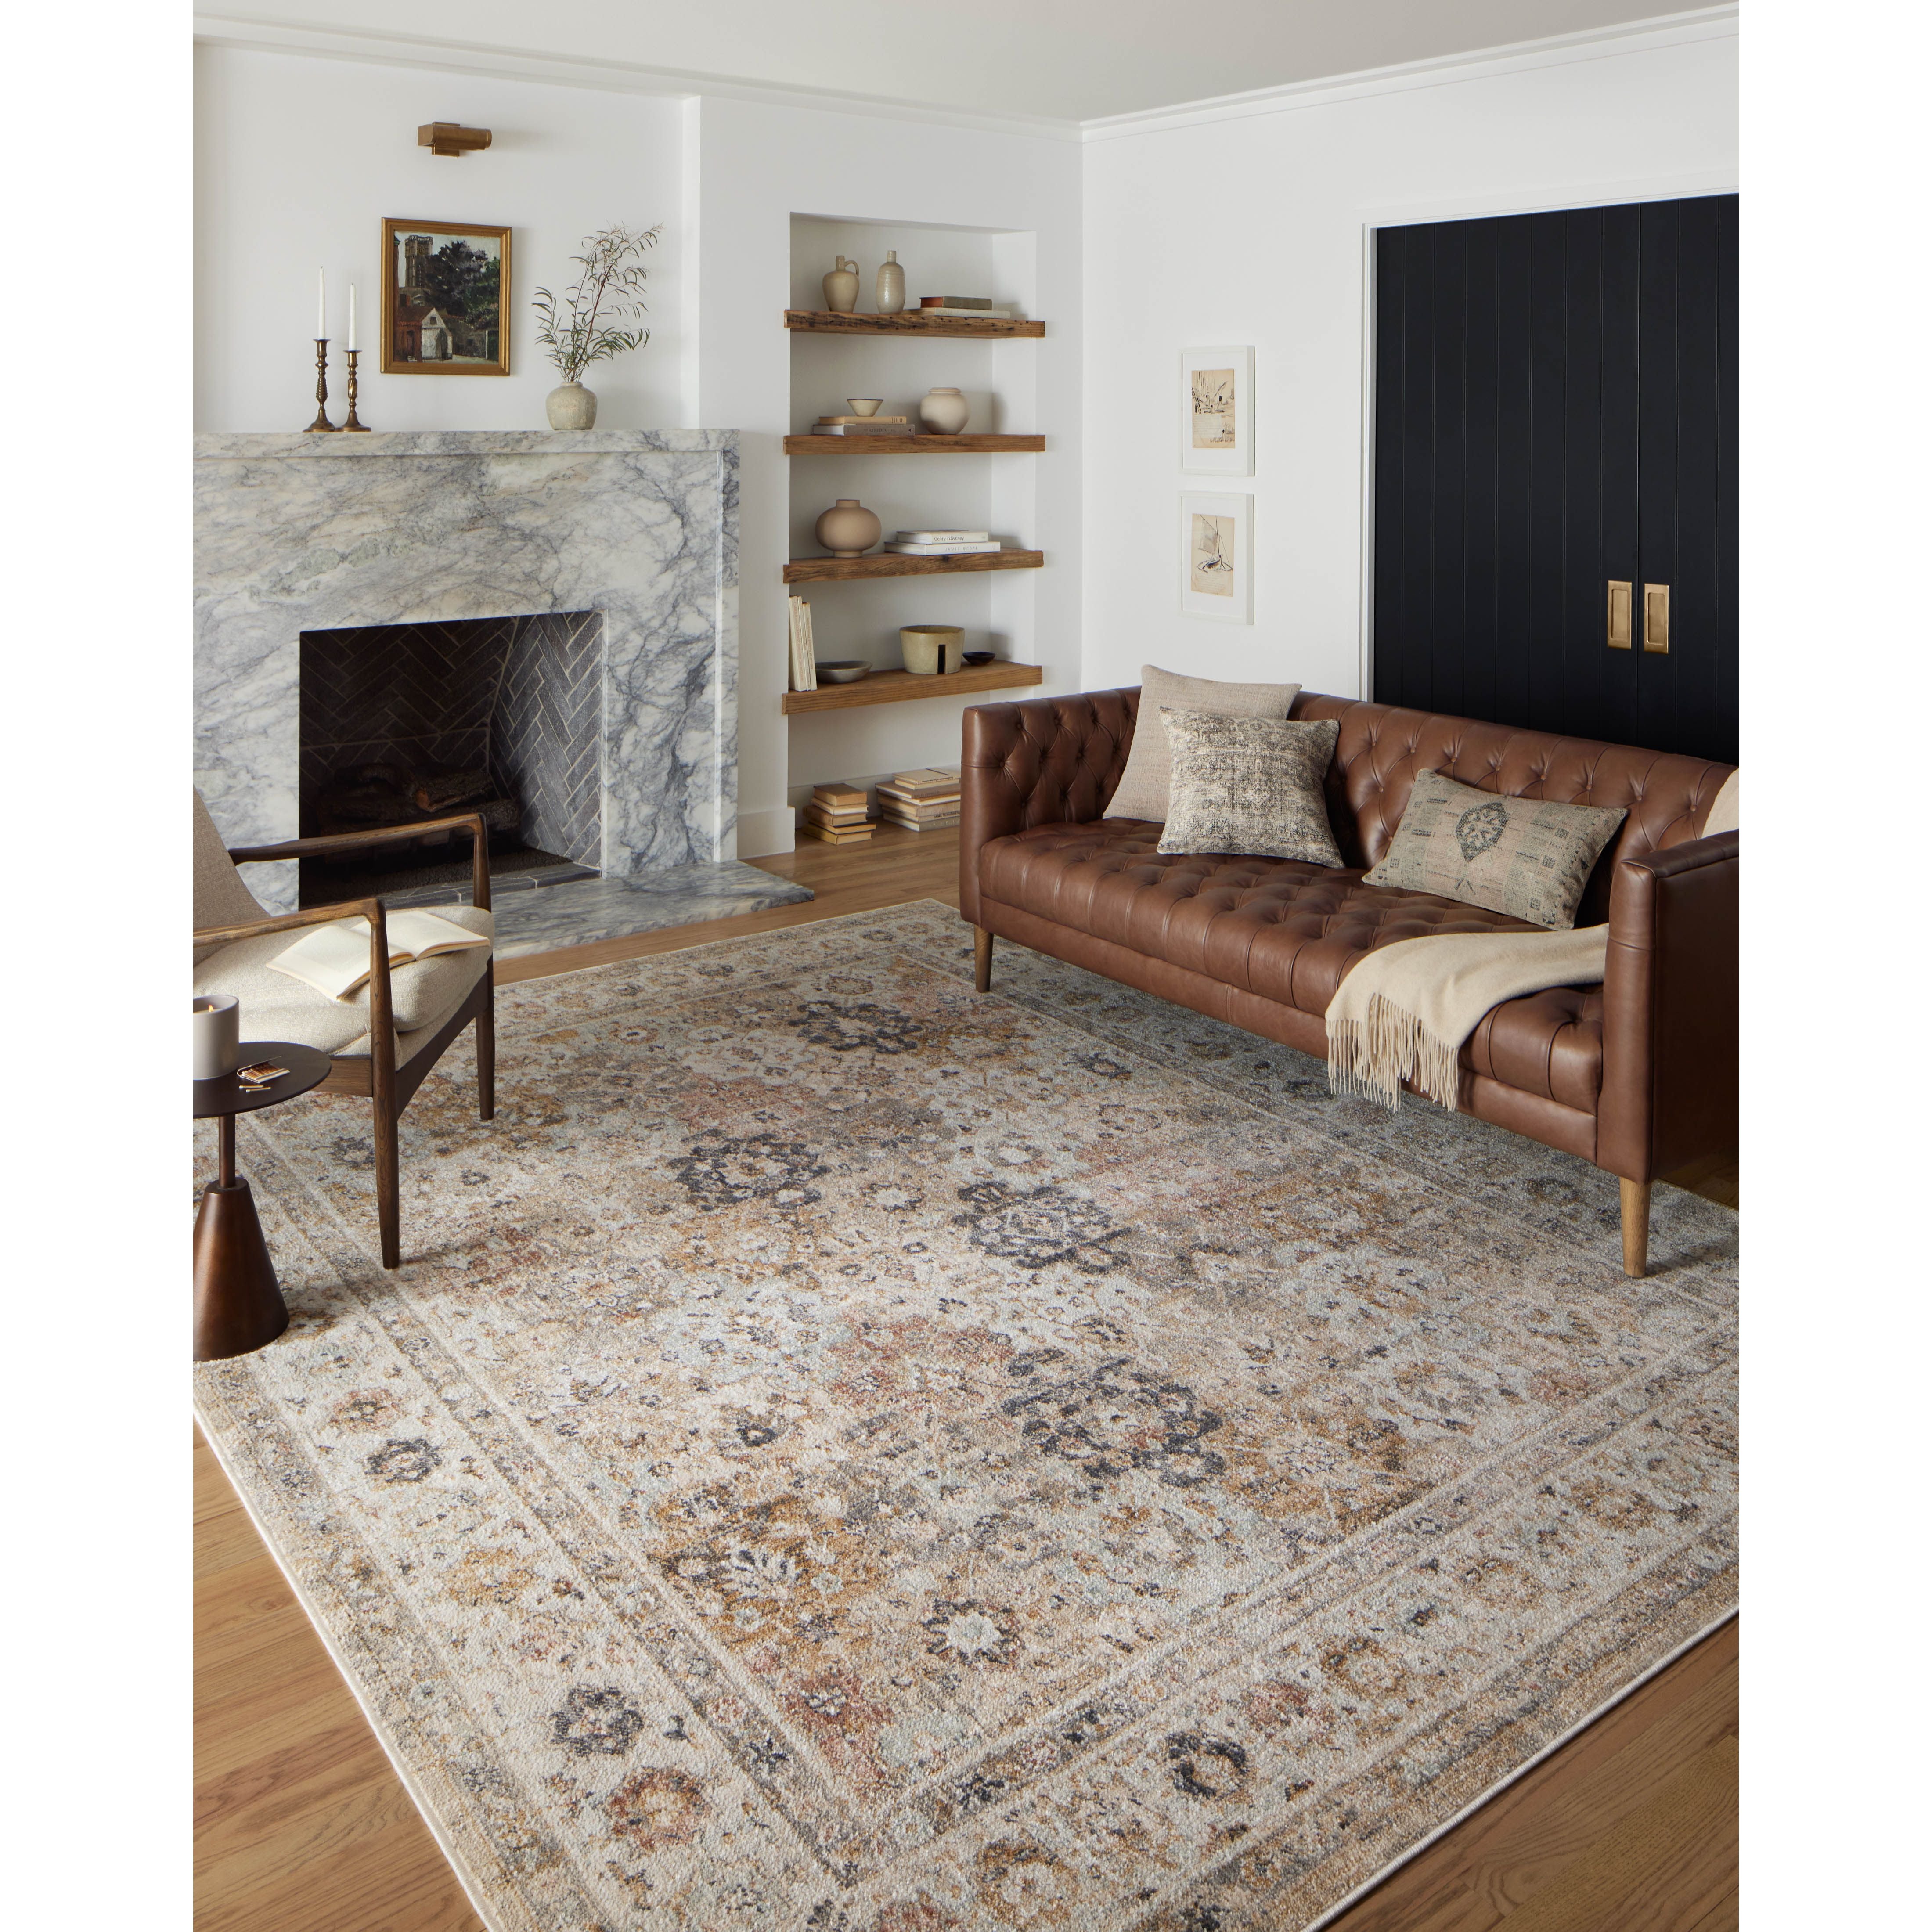 Inspired by antique Turkish Oushak carpets with large-scale motifs, the Monroe Beige / Multi Rug modernizes the traditional design in neutral palettes, many of which have black details that anchor the rug in the room. Monroe is power-loomed of 100% polypropylene for easy care and reliable durability. Amethyst Home provides interior design, new home construction design consulting, vintage area rugs, and lighting in the San Diego metro area.